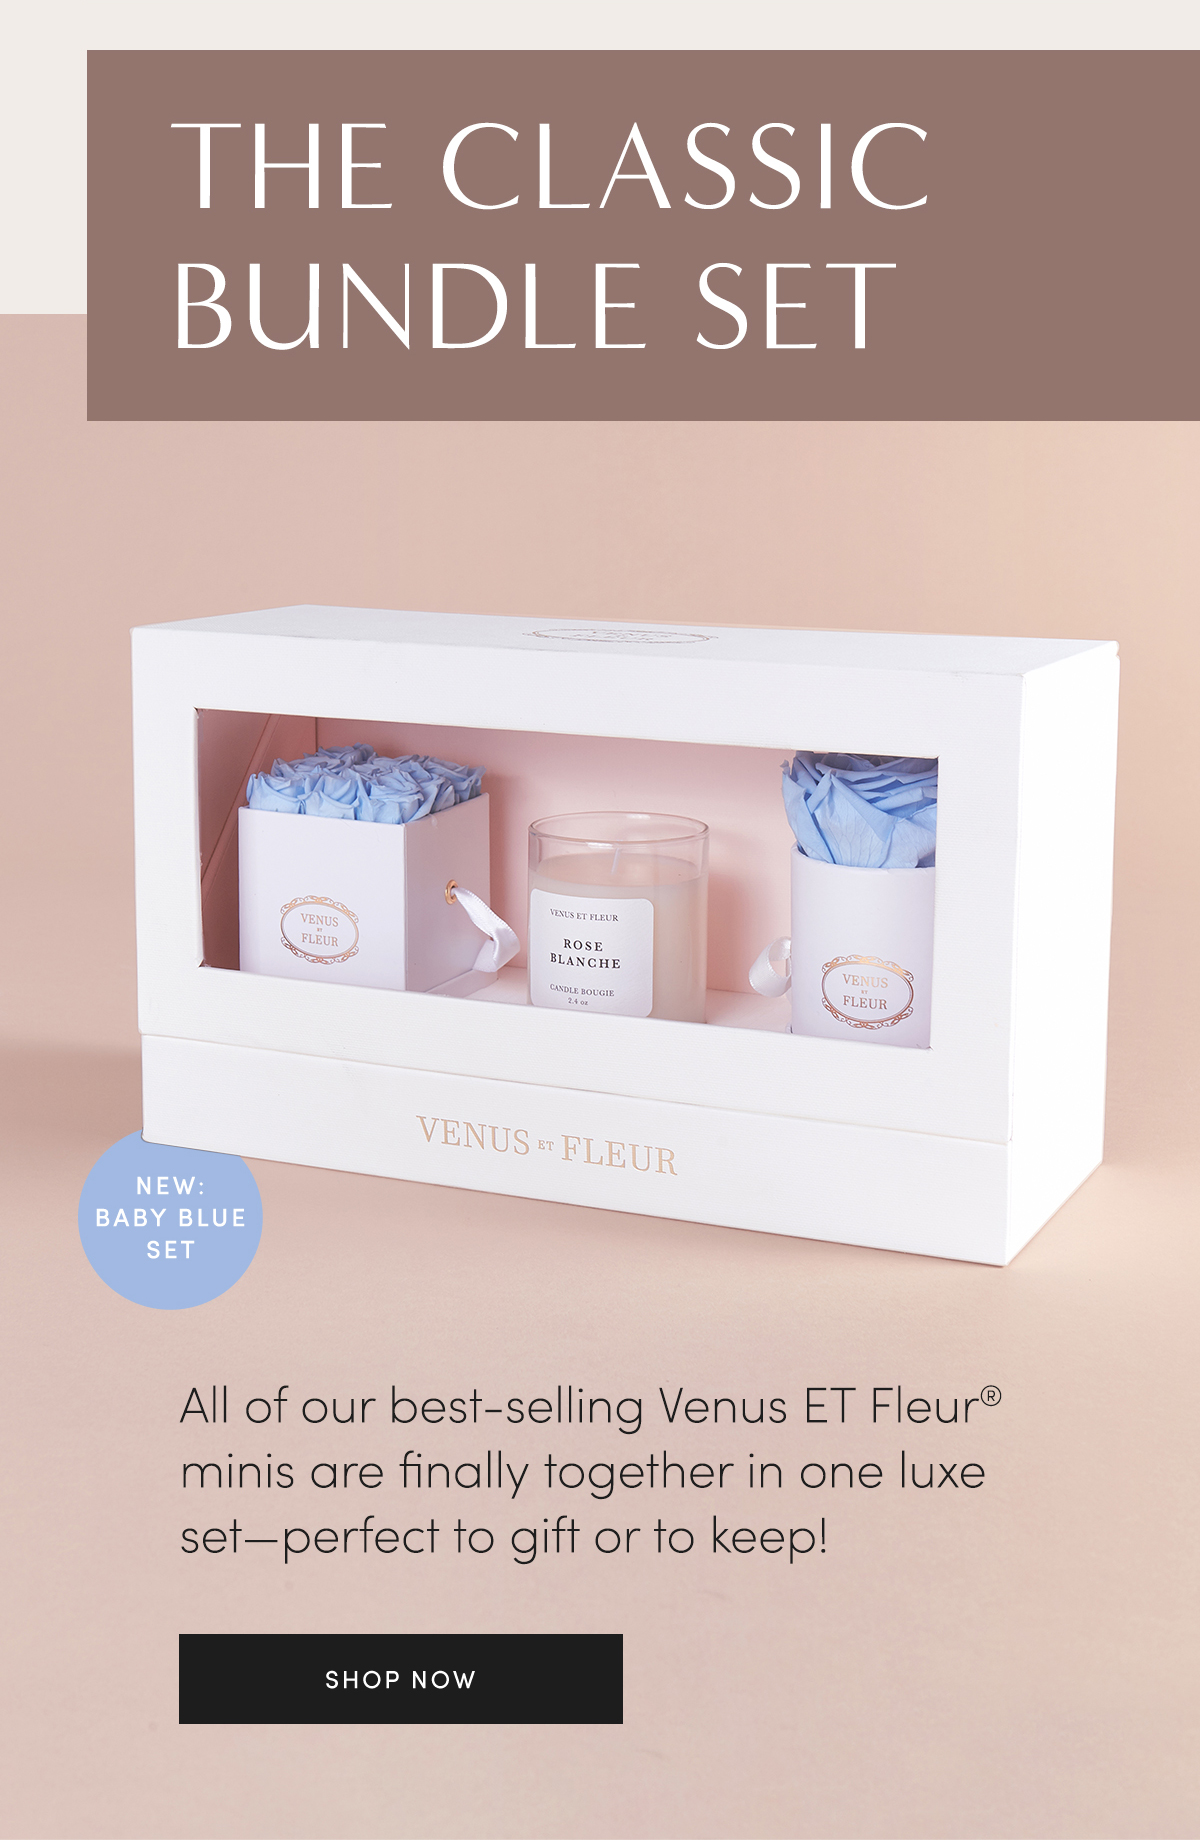 THE CLASSIC BUNDLE SET | NEW: BABY BLUE SET | All of our best-selling Venus ET Fleur? minis are finally together in one luxe set-perfect to gift or to keep! | SHOP NOW